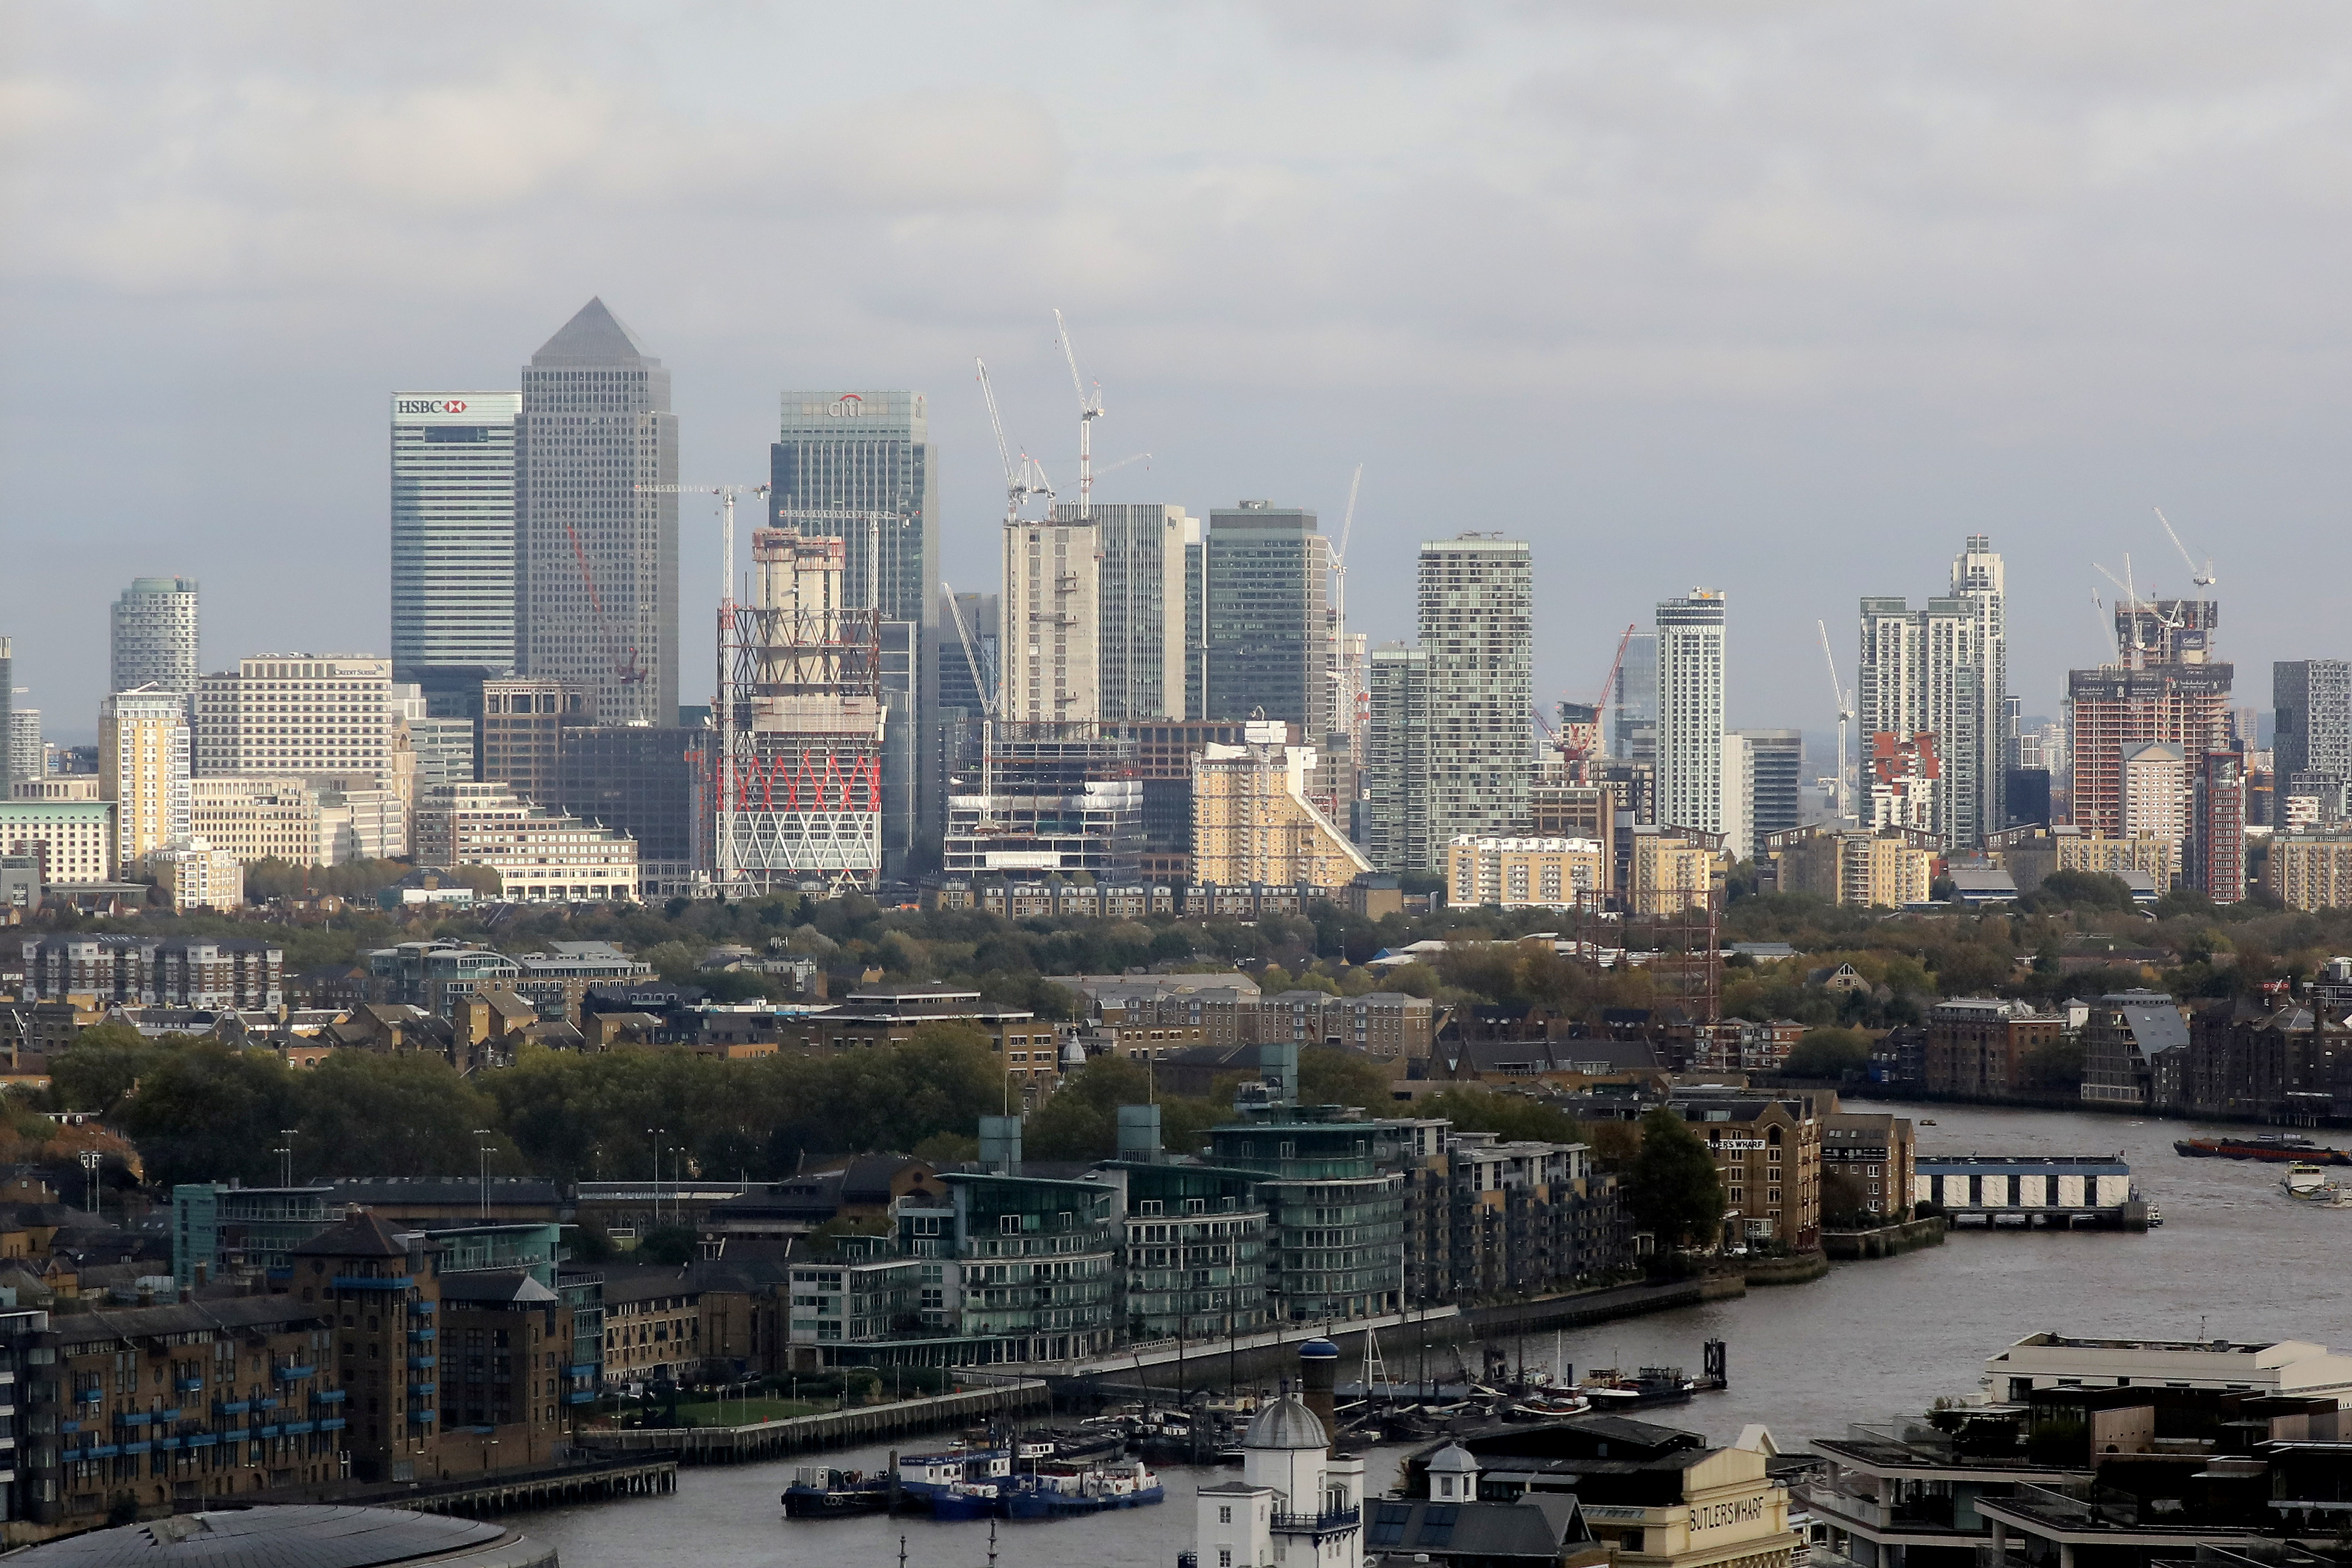 General view of Canary Wharf financial district in London